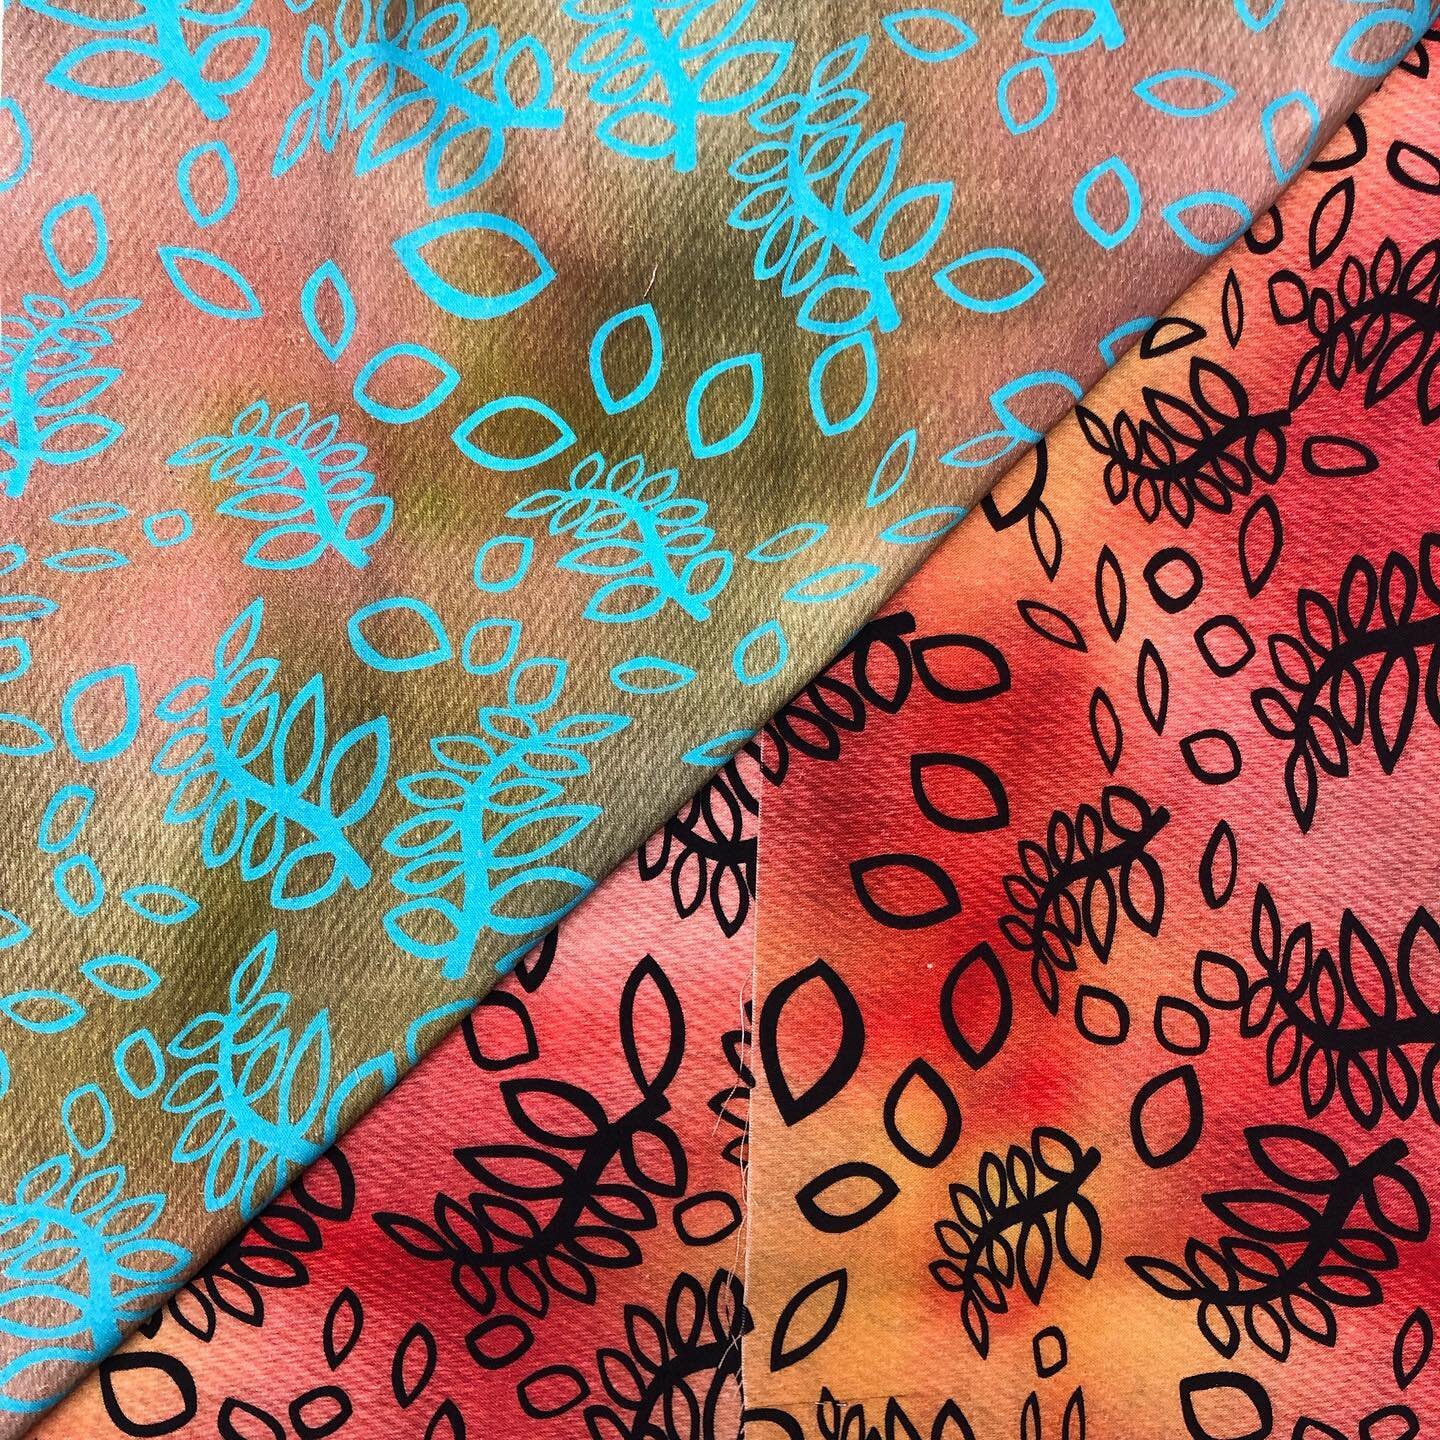 Buy our latest brand of 100% Cotton super soft digital prints - Highfield - in all our stores and online! Many more prints available and new prints added weekly.
.
.
.
.
.
.

 #fabrics#digitalprinting #craftcotton#purecotton  #craftcottons#cottoncraf